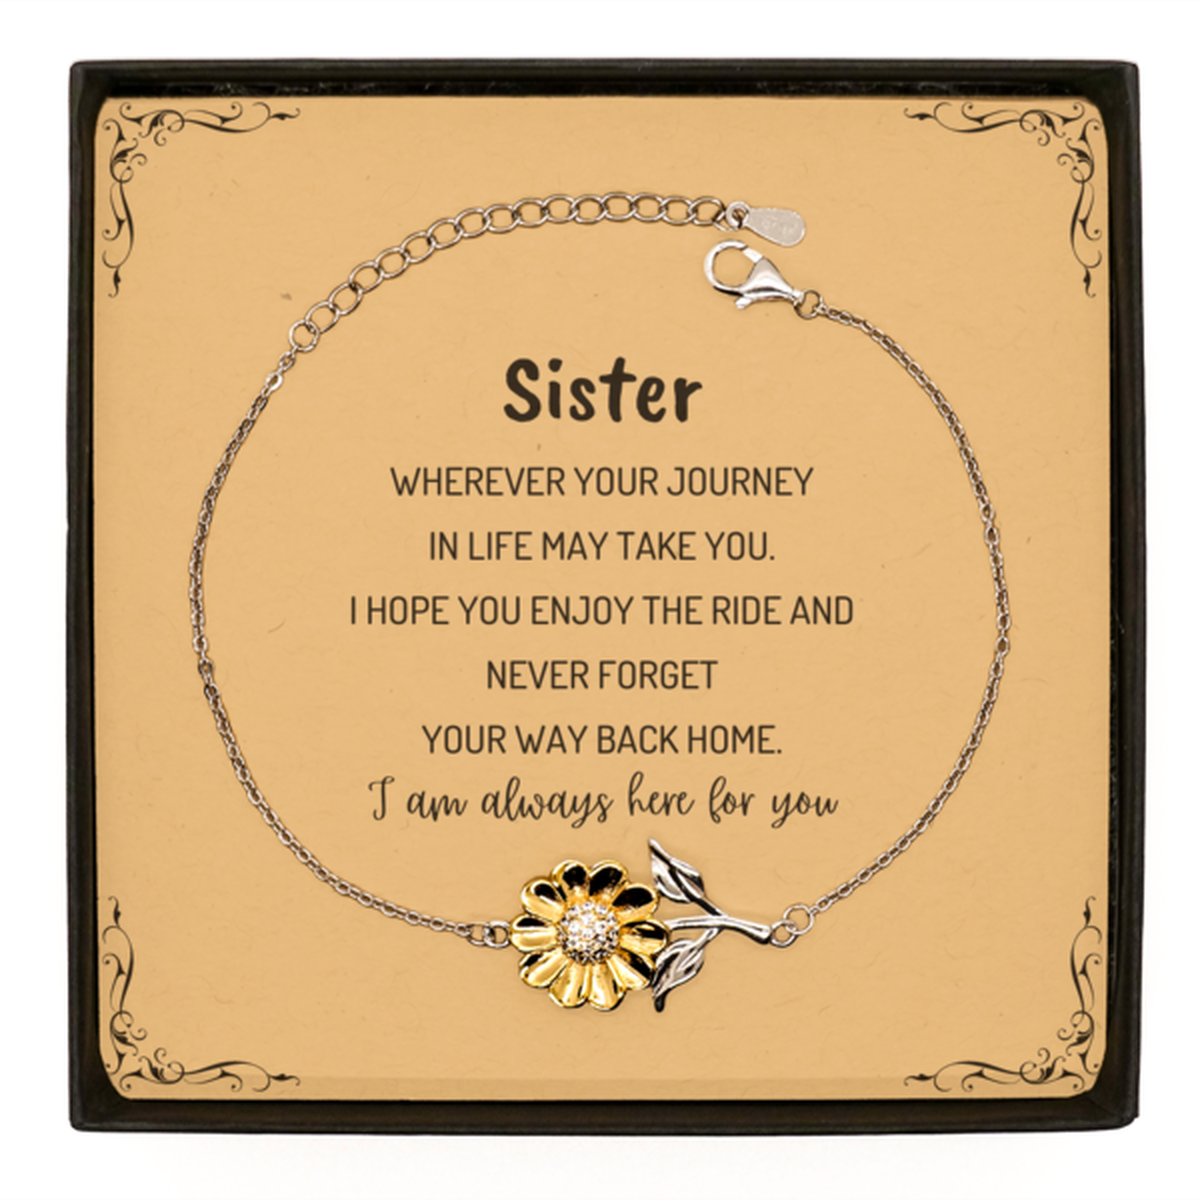 Sister wherever your journey in life may take you, I am always here for you Sister Sunflower Bracelet, Awesome Christmas Gifts For Sister Message Card, Sister Birthday Gifts for Men Women Family Loved One